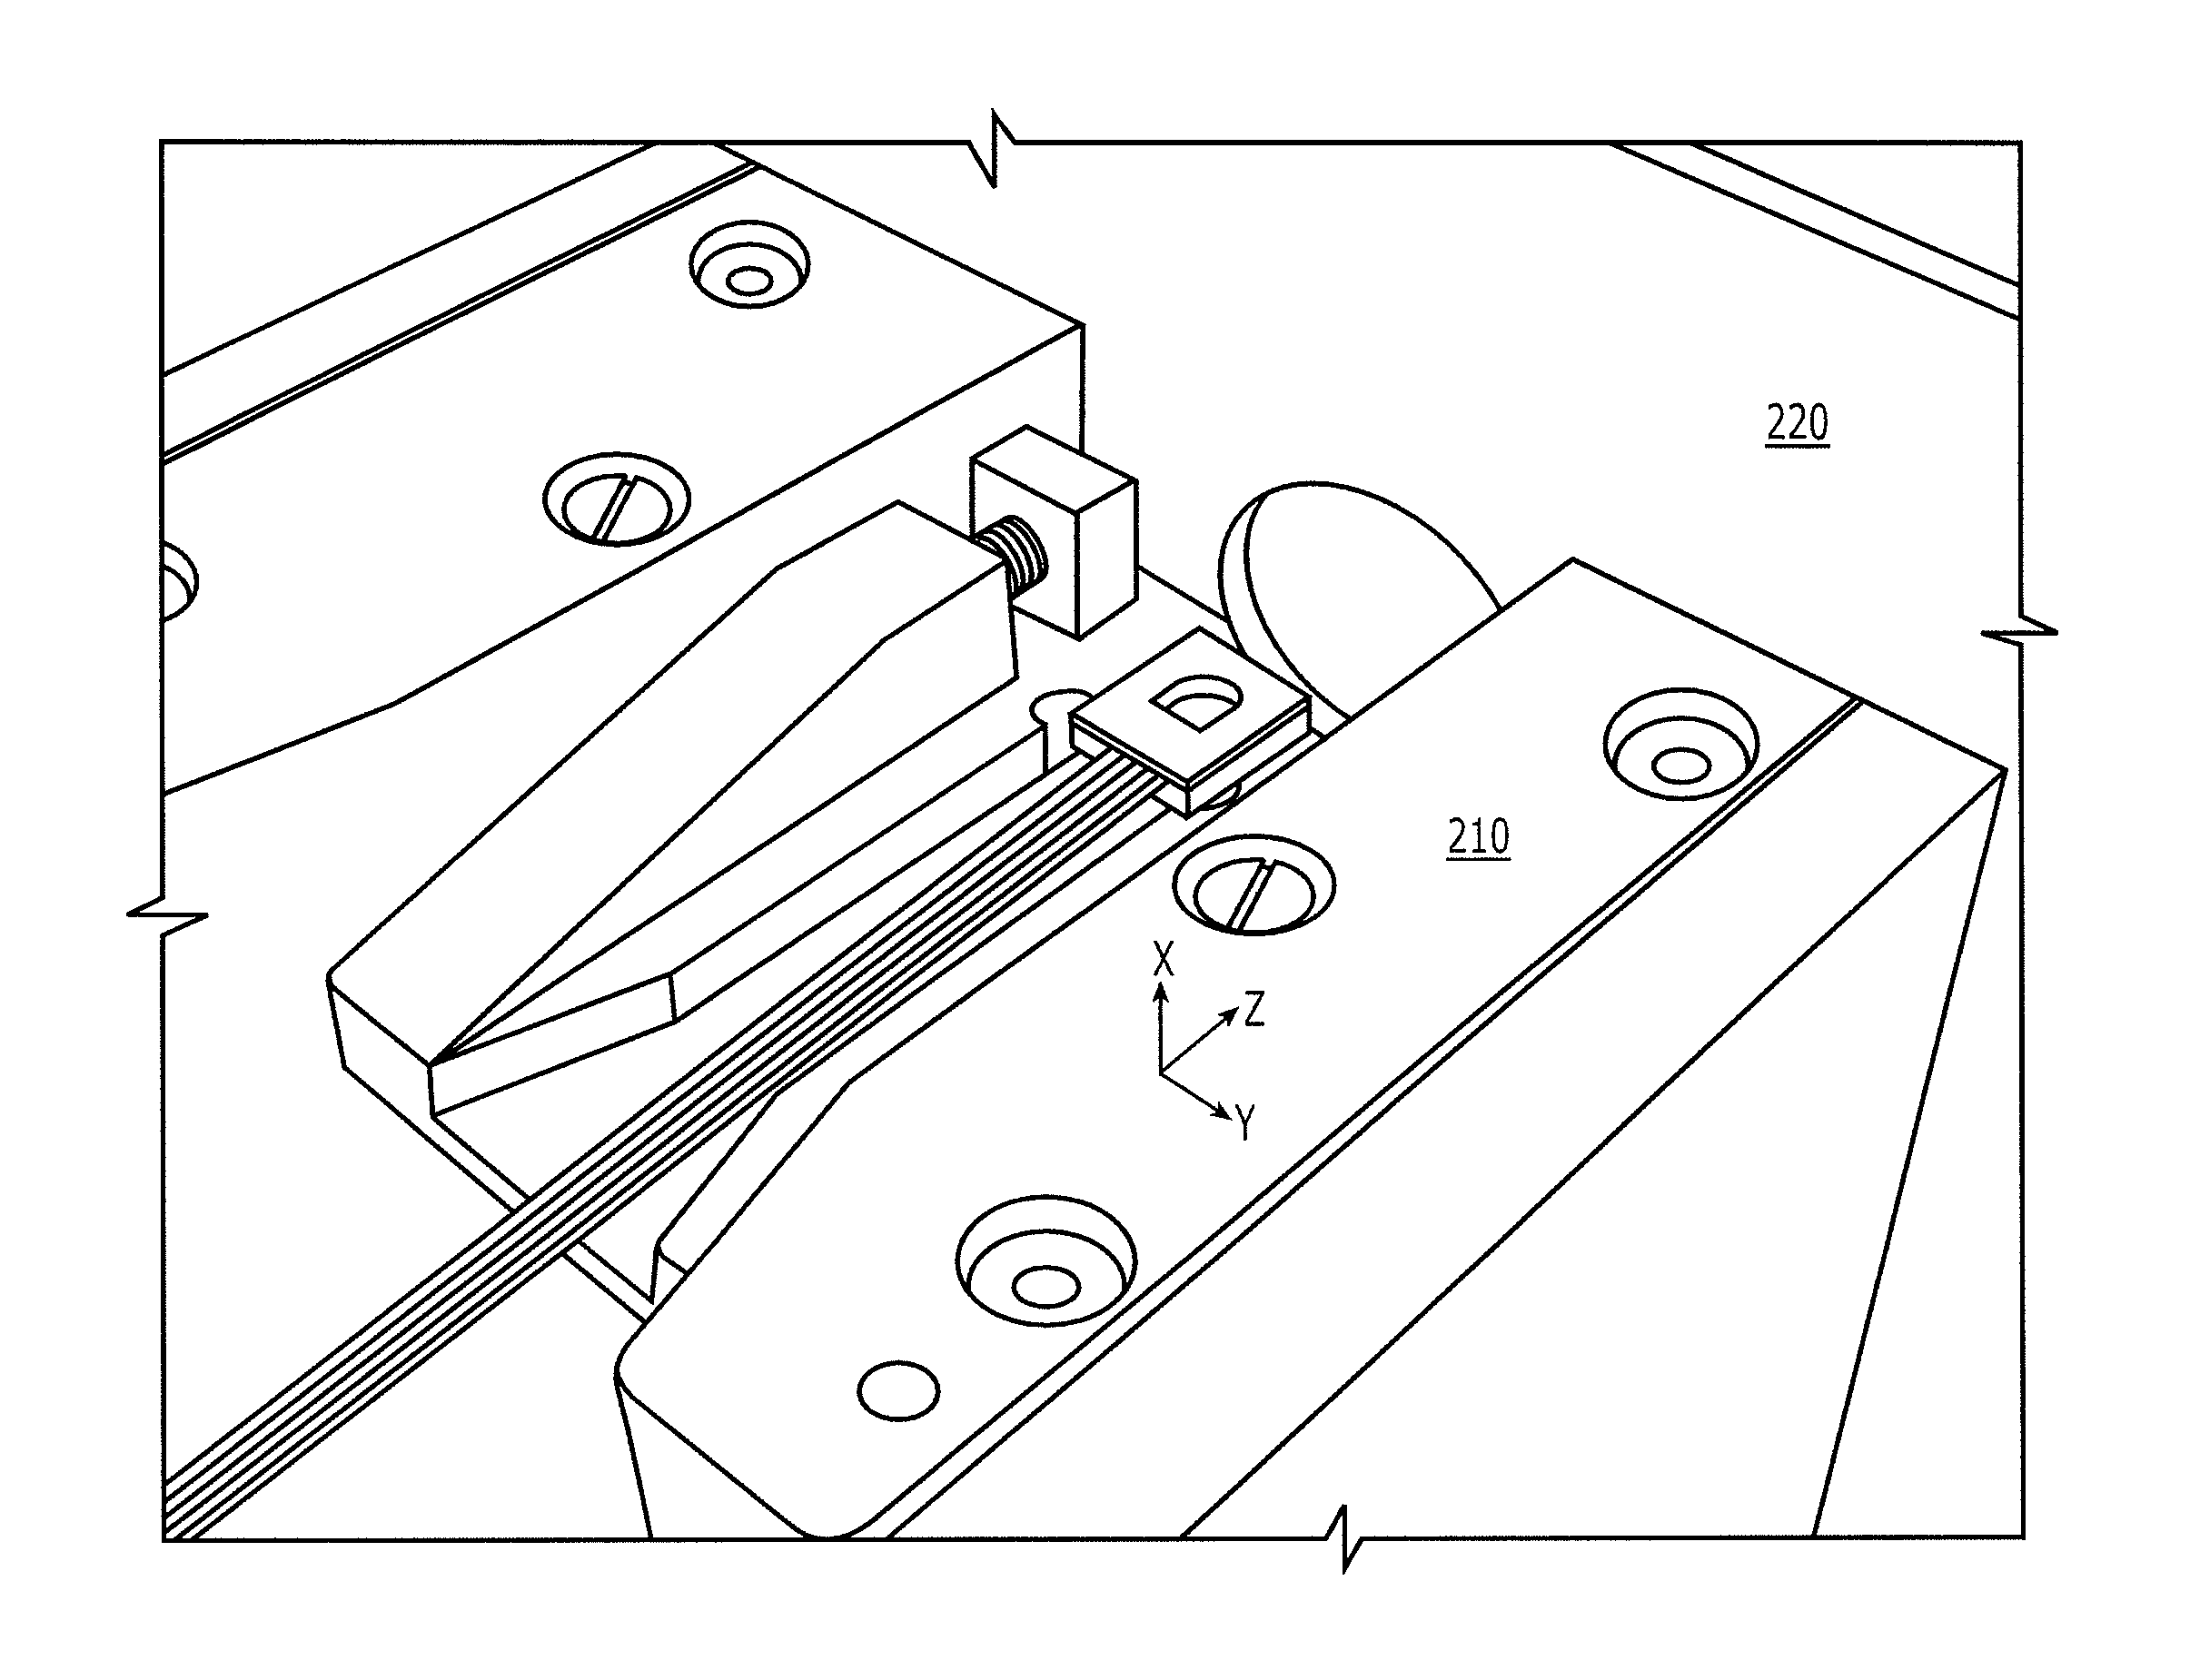 Method for preparing a ferrule assembly